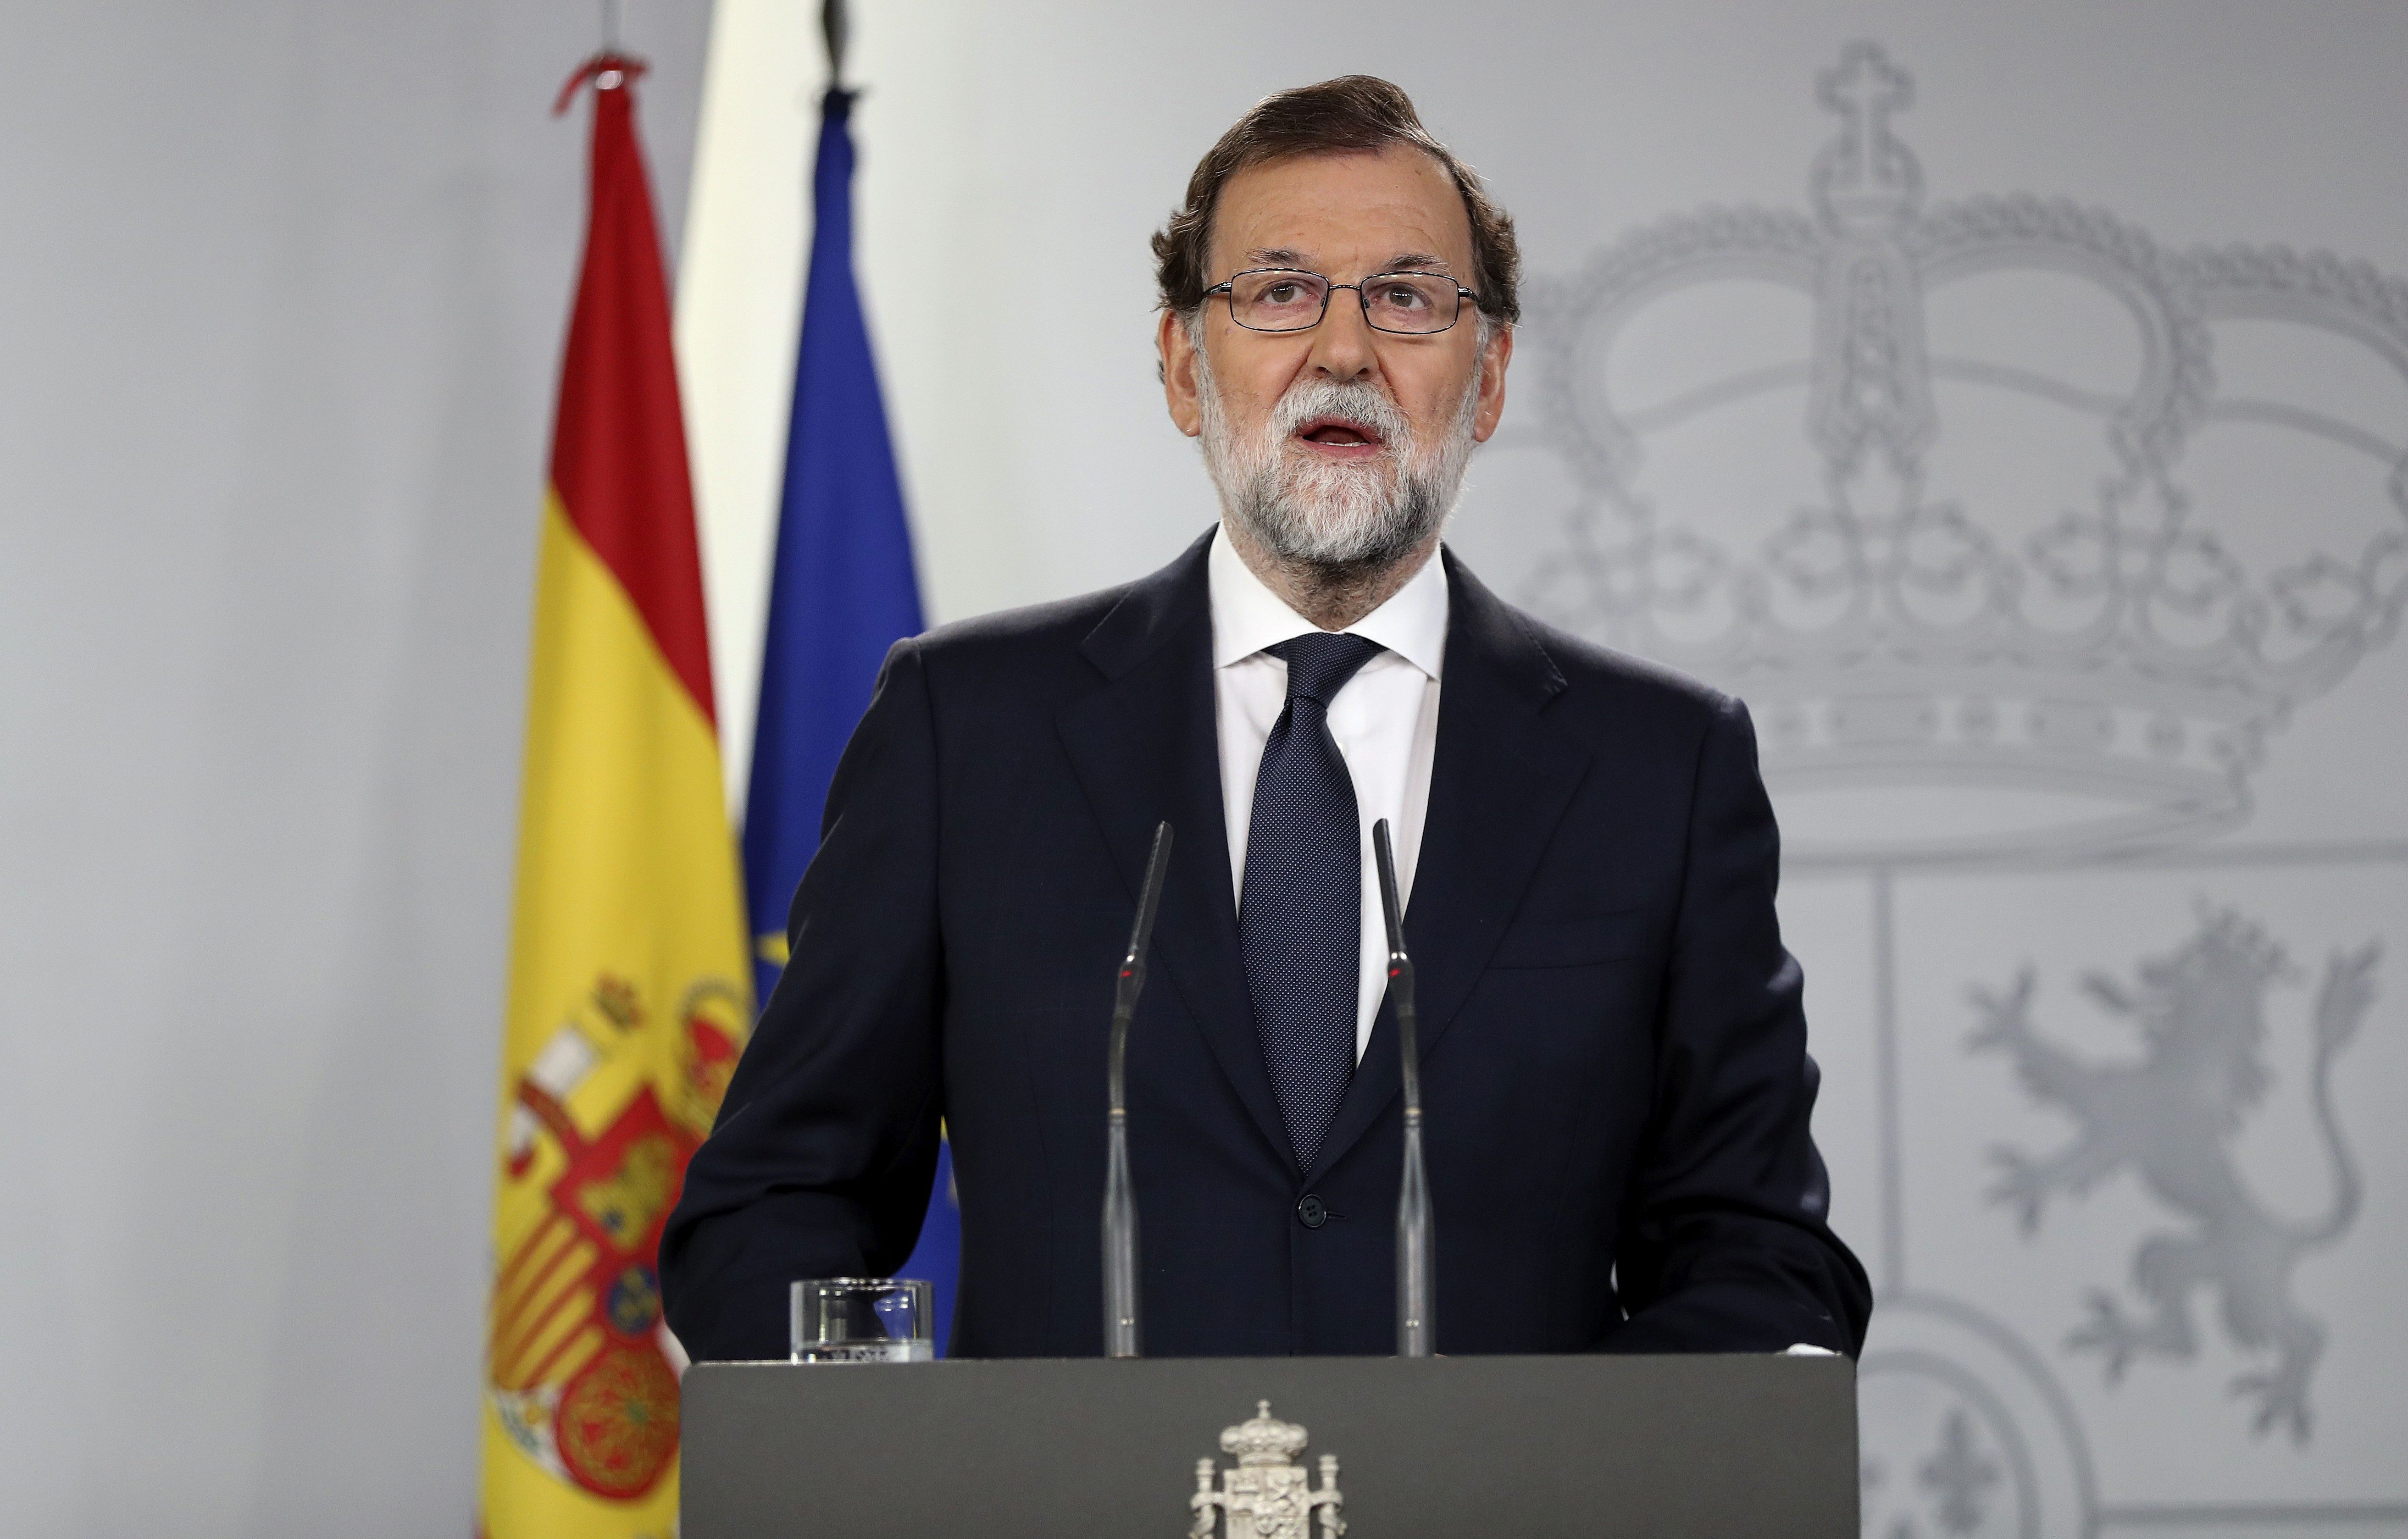 epa06216424 Spanish Prime Minister Mariano Rajoy, during his appearance this afternoon at the Palace of La Moncloa, in Madrid, Spain, on 20 September 2017. Rajoy has asked the leaders of the Catalonian Regional Government to 'cease their actions' saying 'they know that this referendum can no longer be held' because 'it was never legal and legitimate' and they are 'in time to avoid greater evils.'.  EPA/Chema Moya